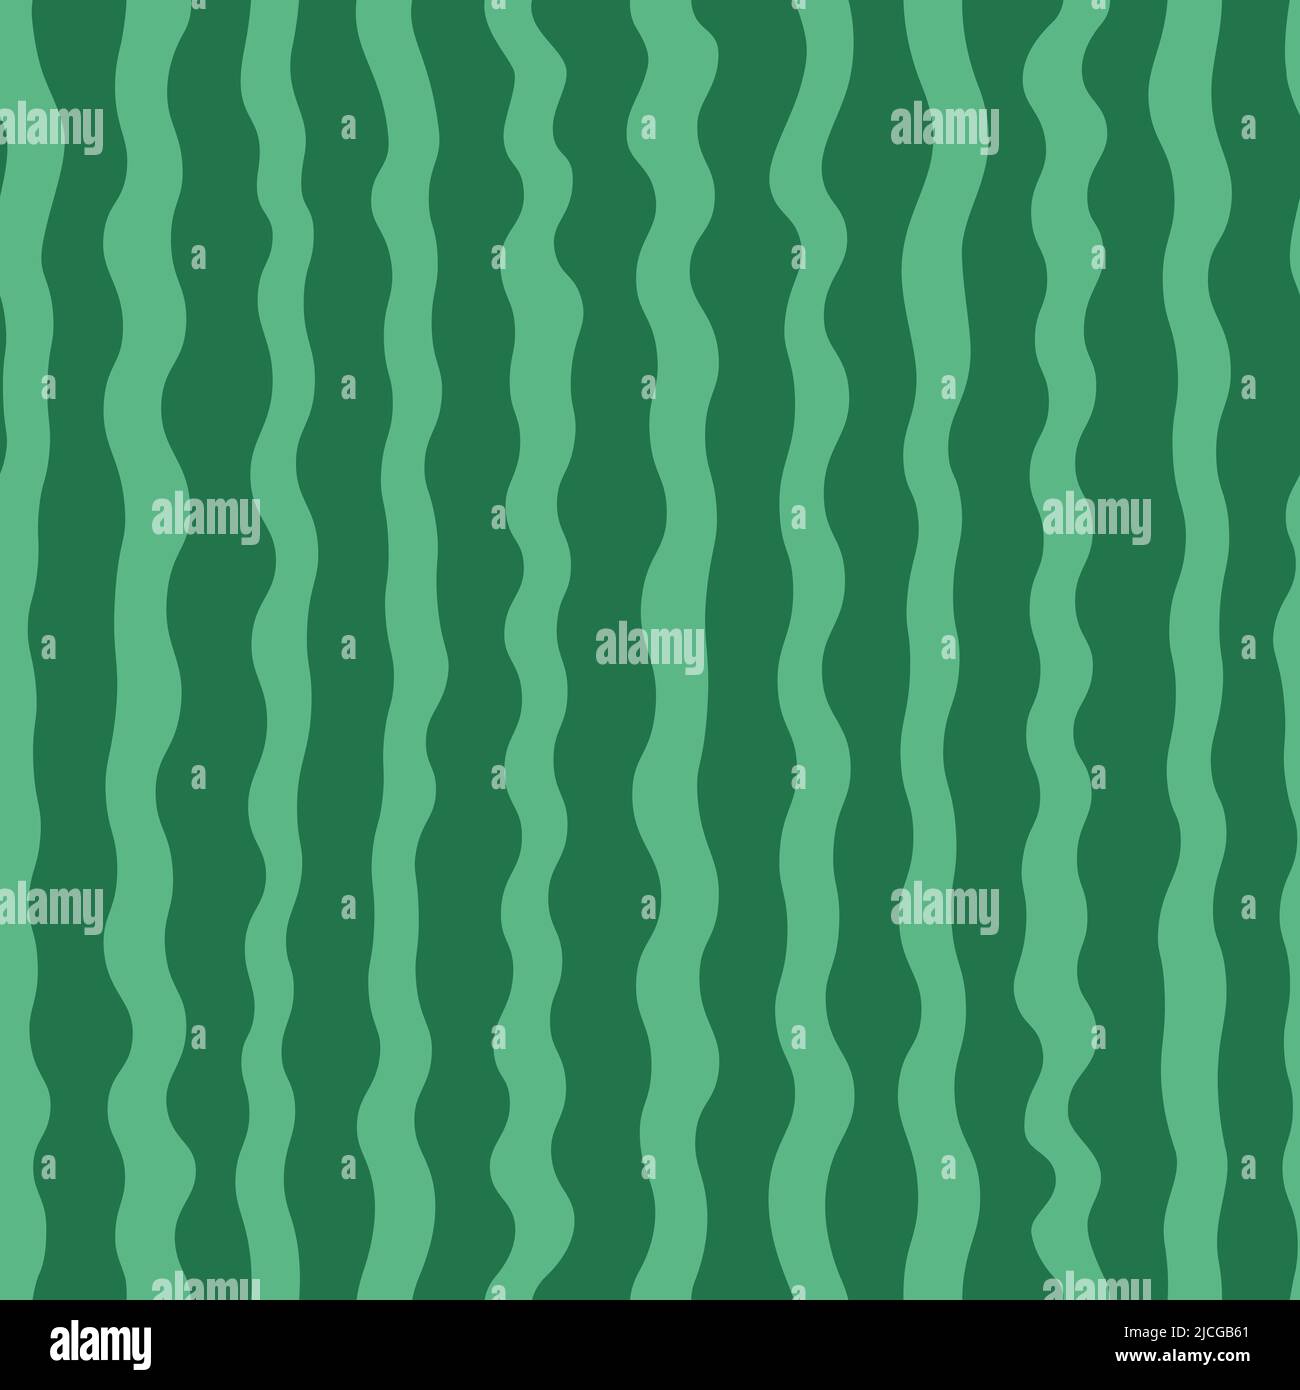 Vector seamless pattern. Green curved stripes on a green background. Simple watermelon print. Stock Vector